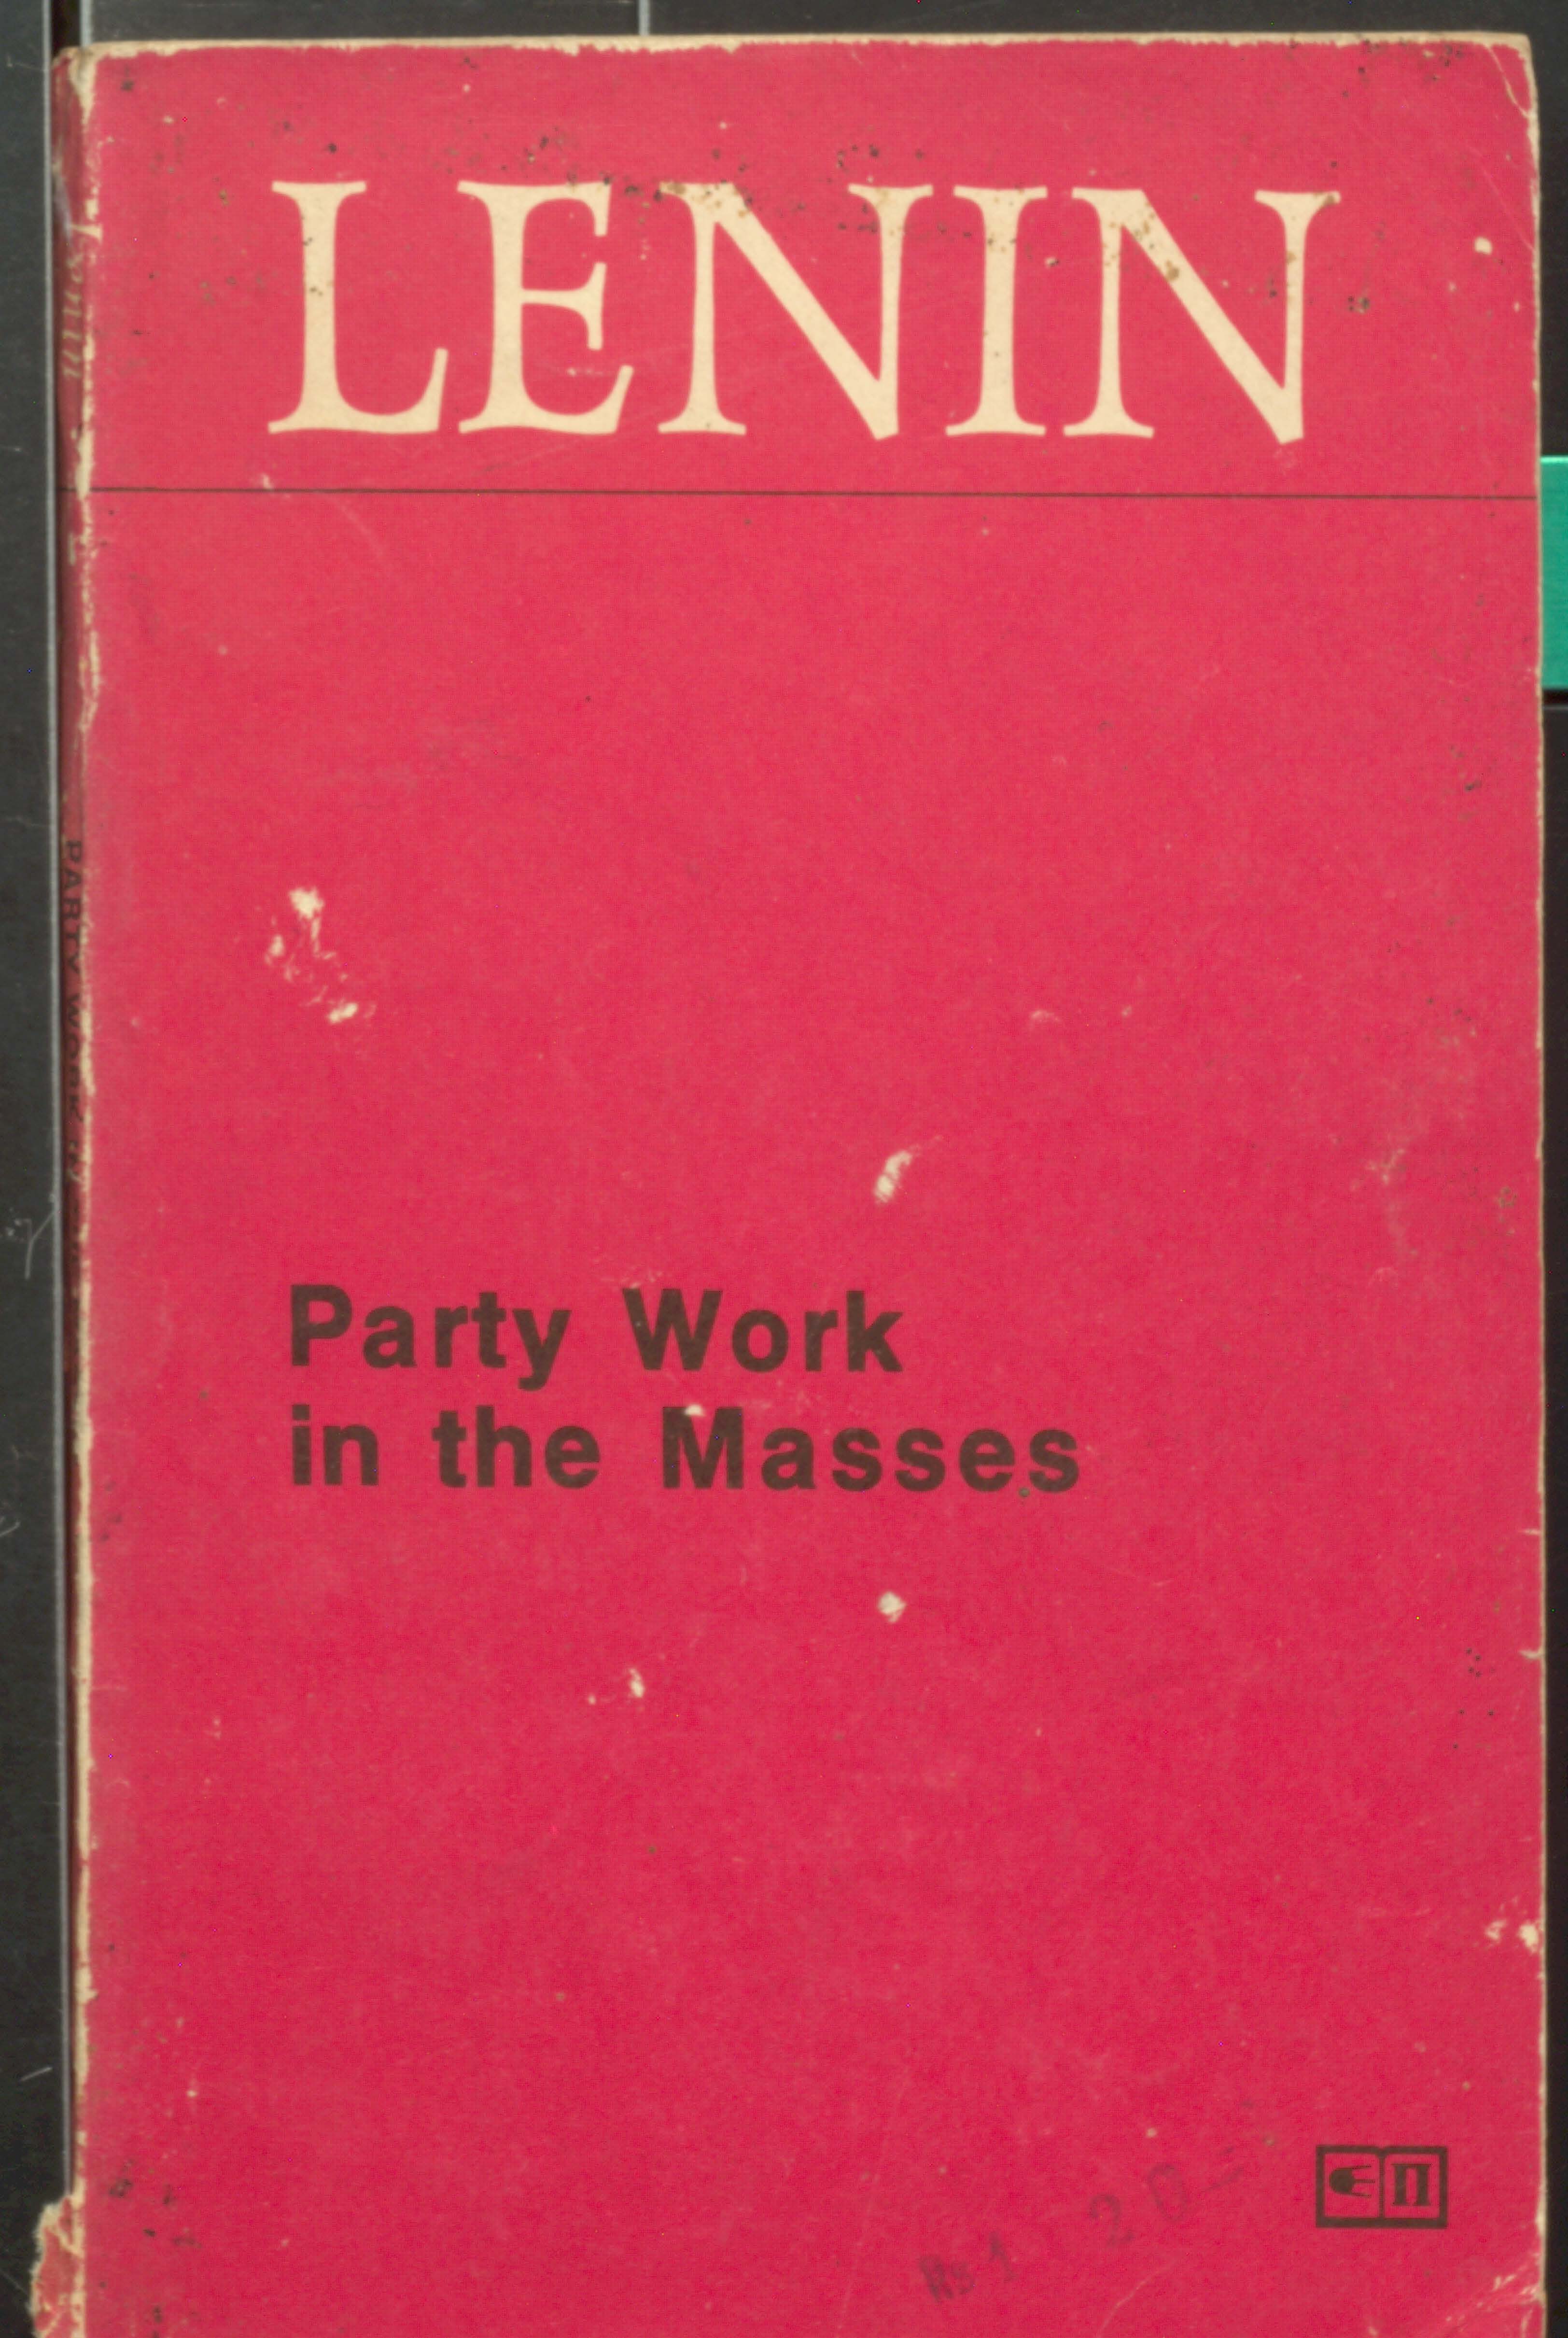 Lenin party work in the masses